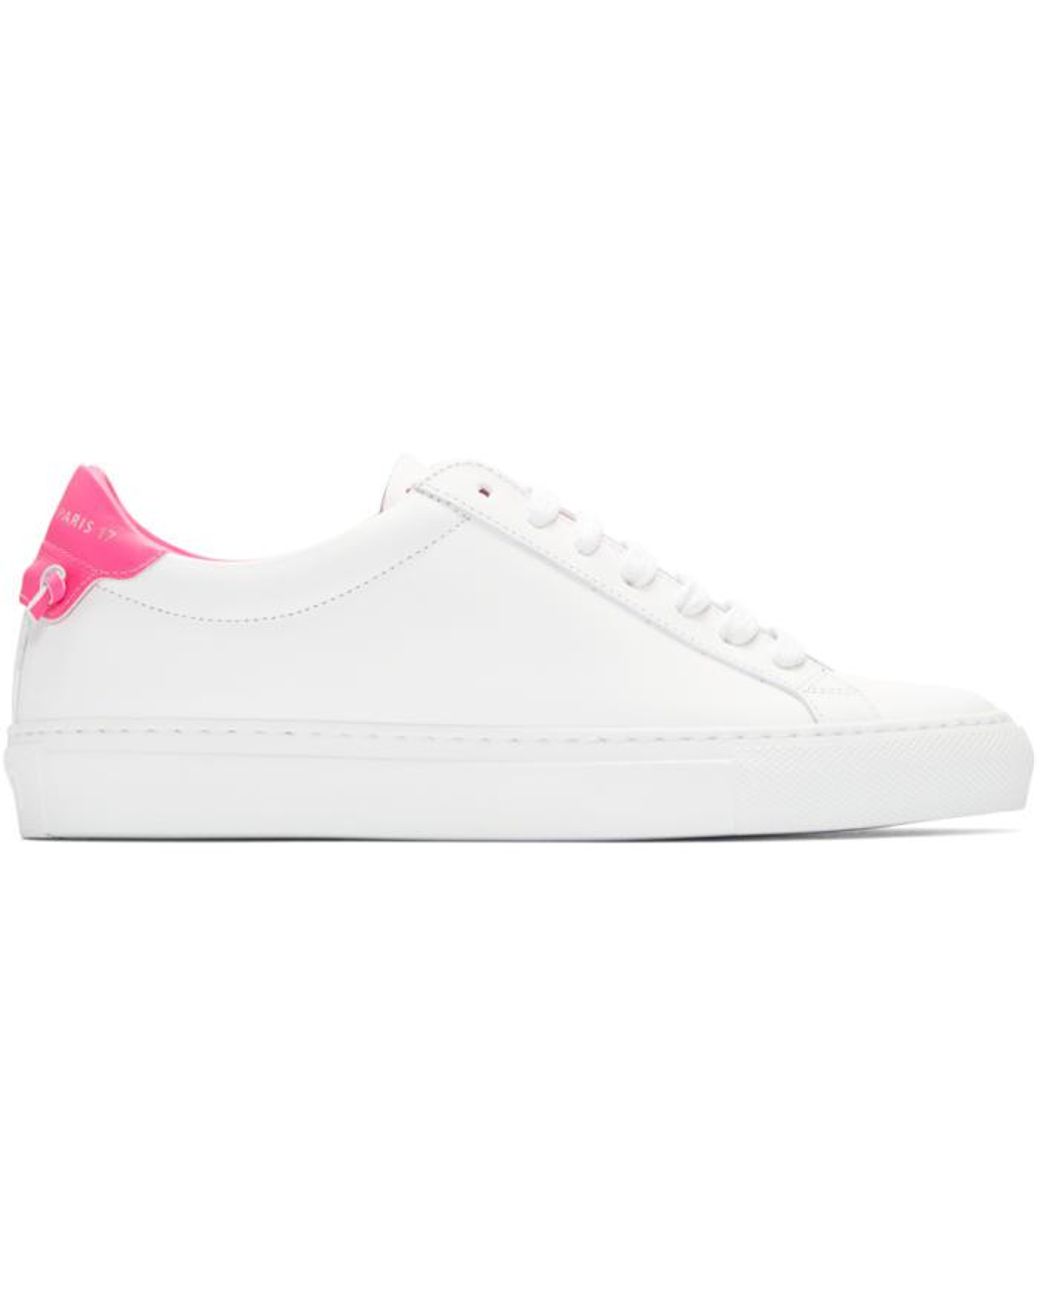 Givenchy White & Pink Urban Knots Sneakers | Lyst